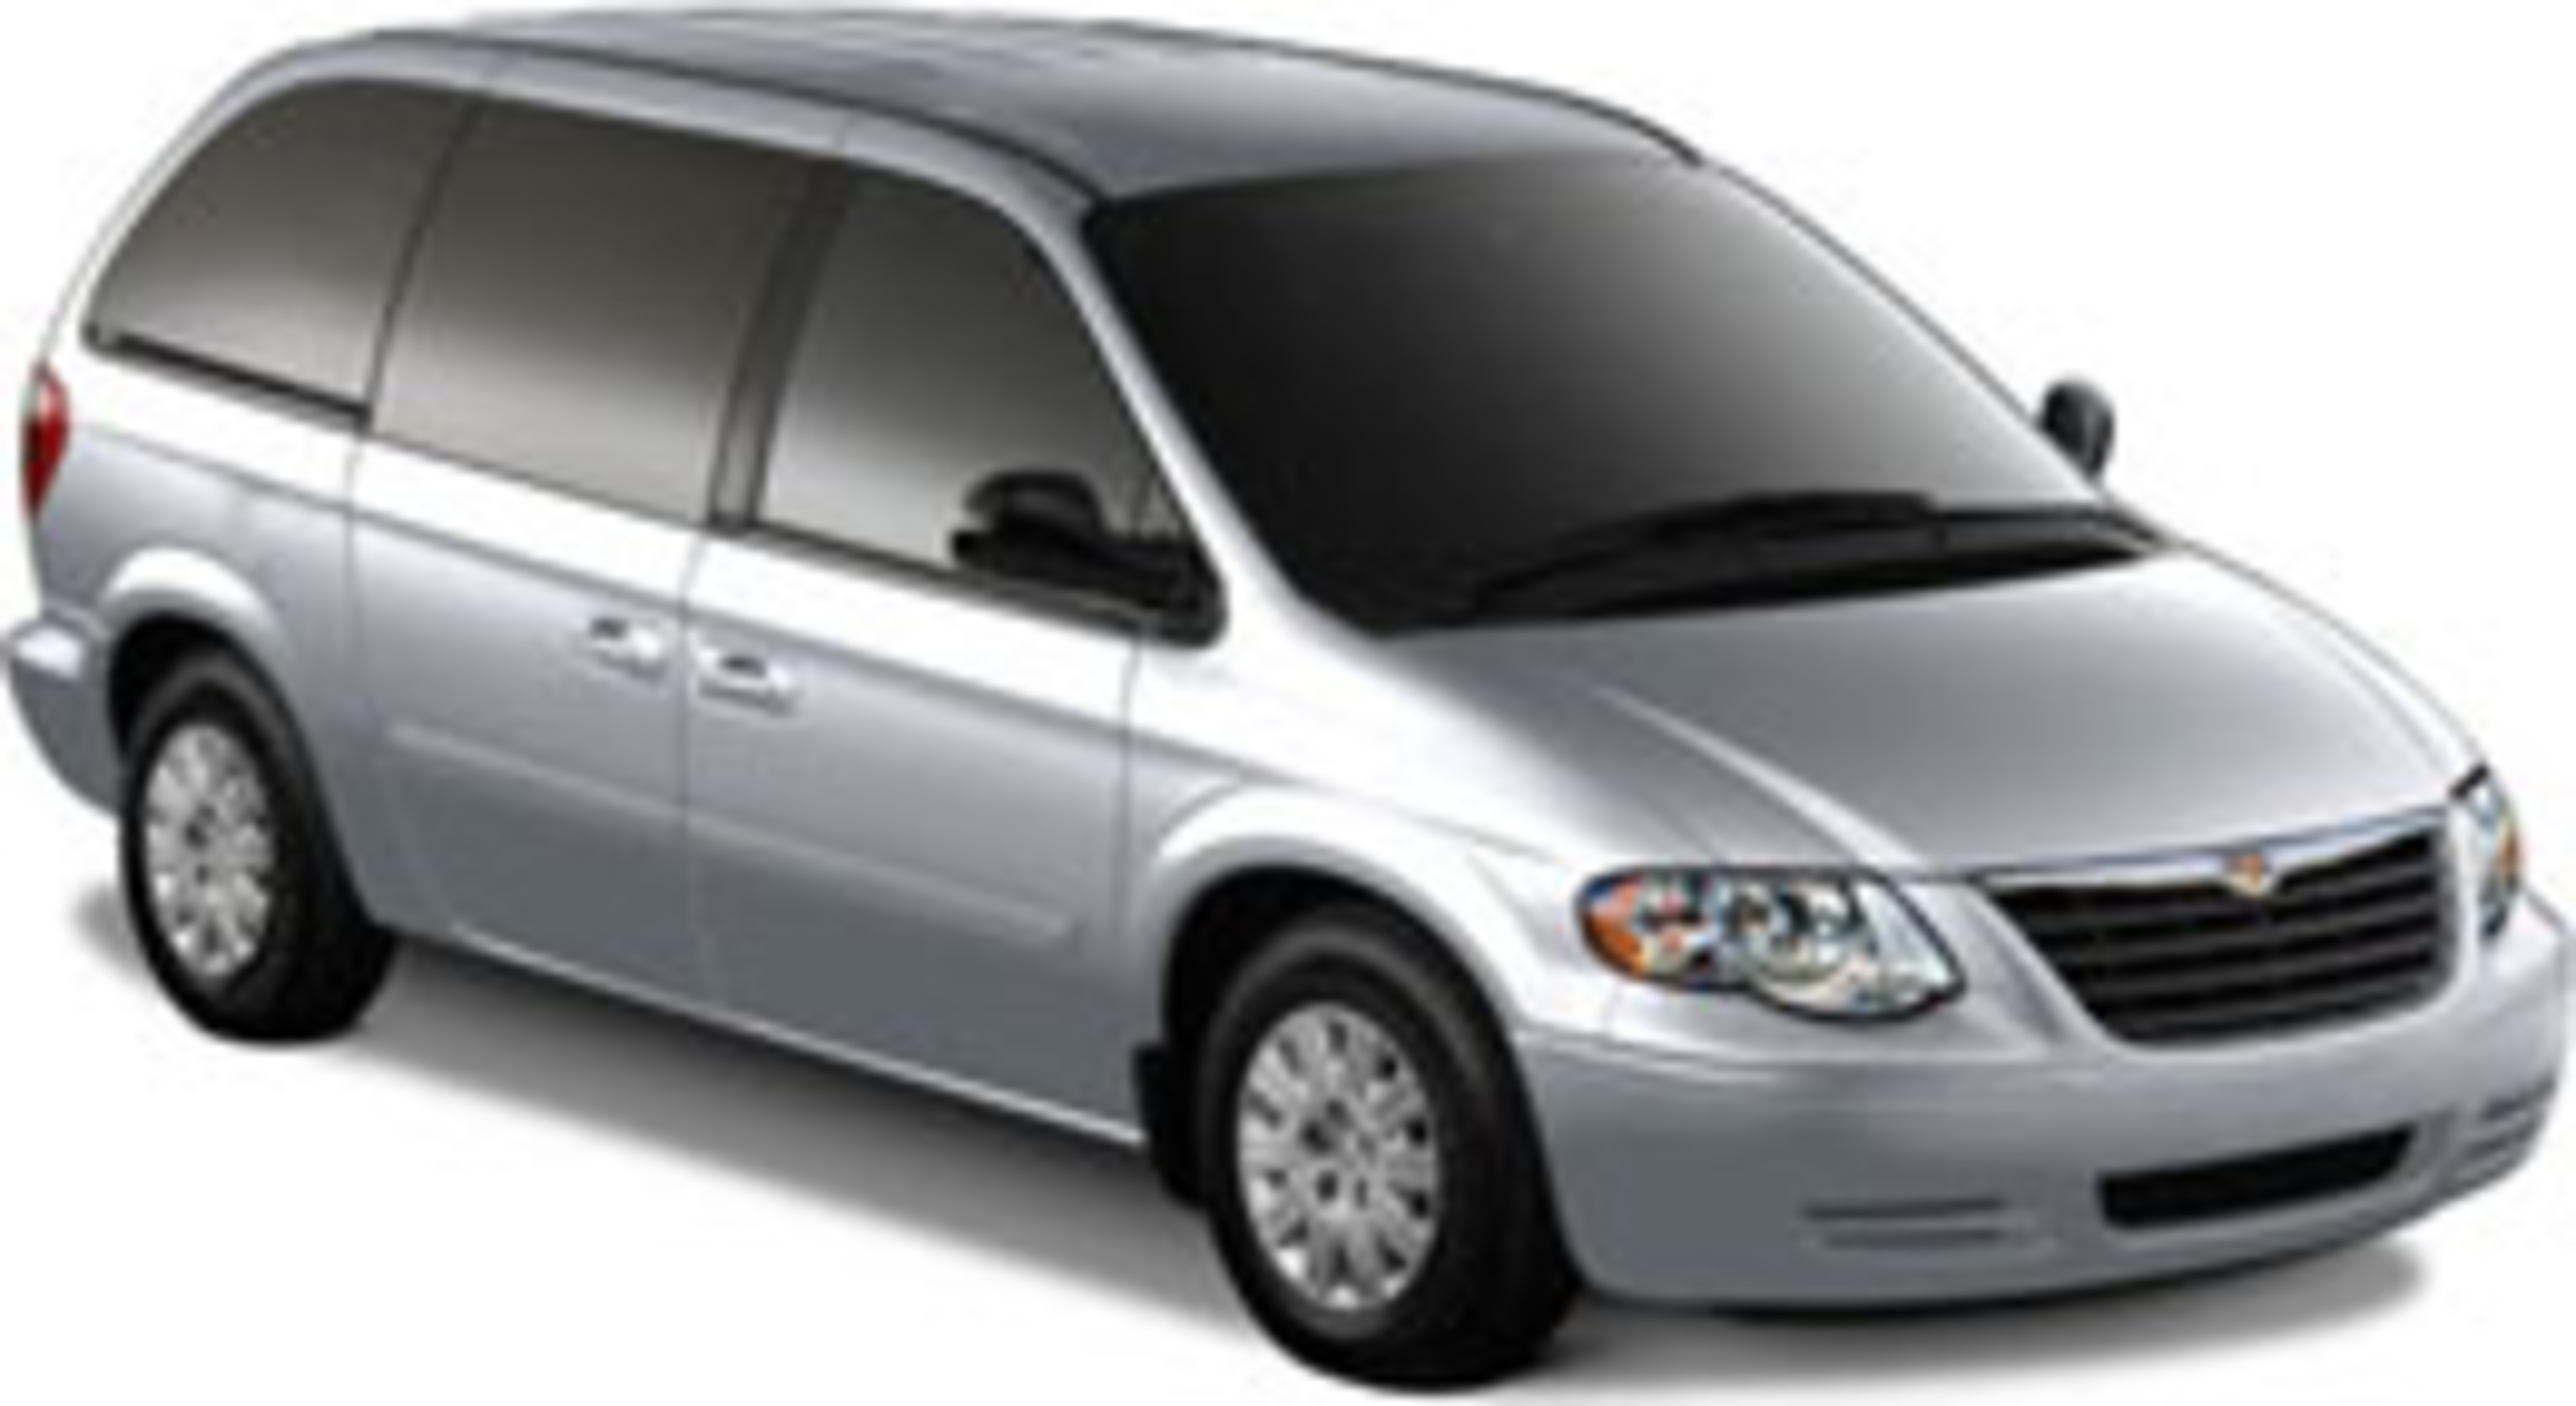 2006 Chrysler Town & Country Service and Repair Manual